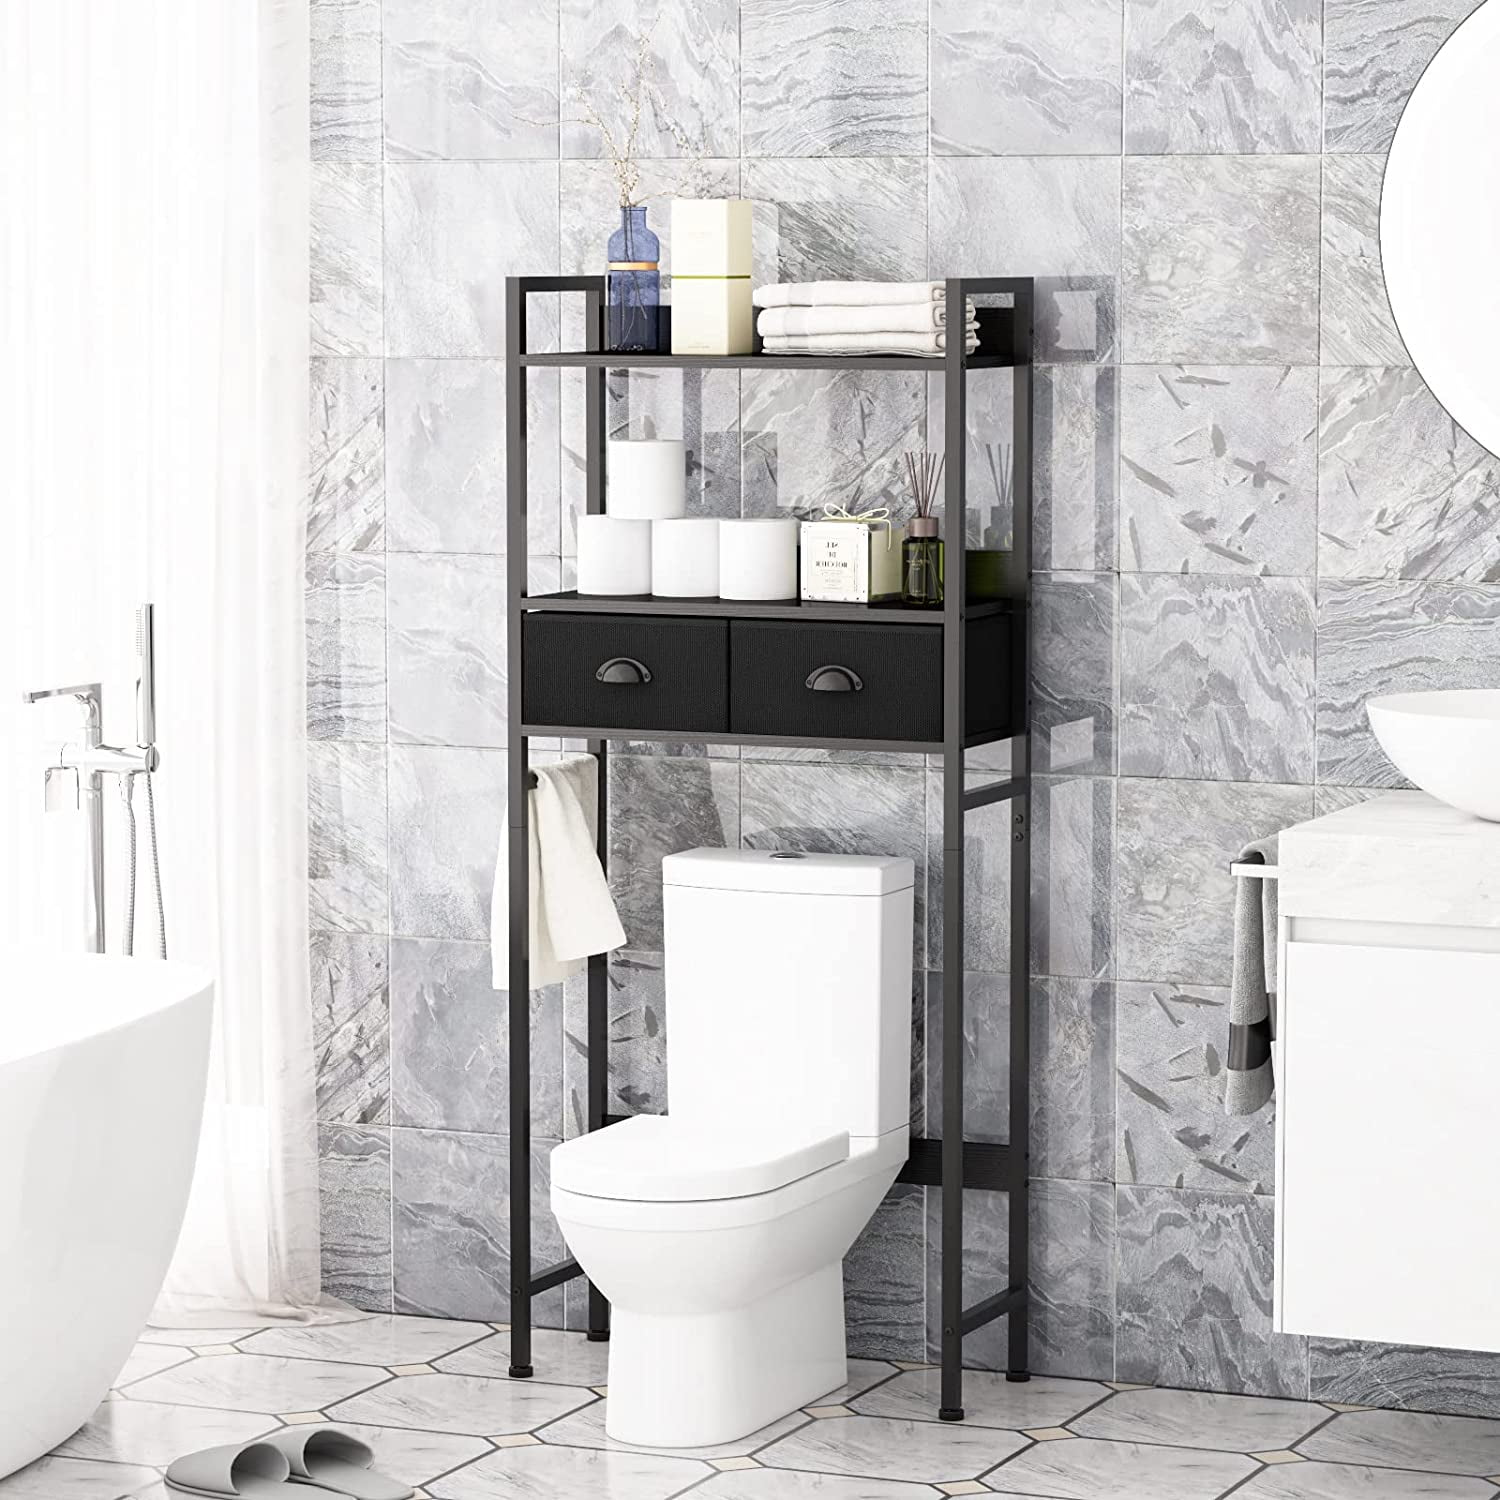 Galood Bathroom Storage Shelves Organizer Adjustable 3 Tiers, Over The Toilet Storage Floating Shelves for Wall Mounted with Hanging Rod (Black)